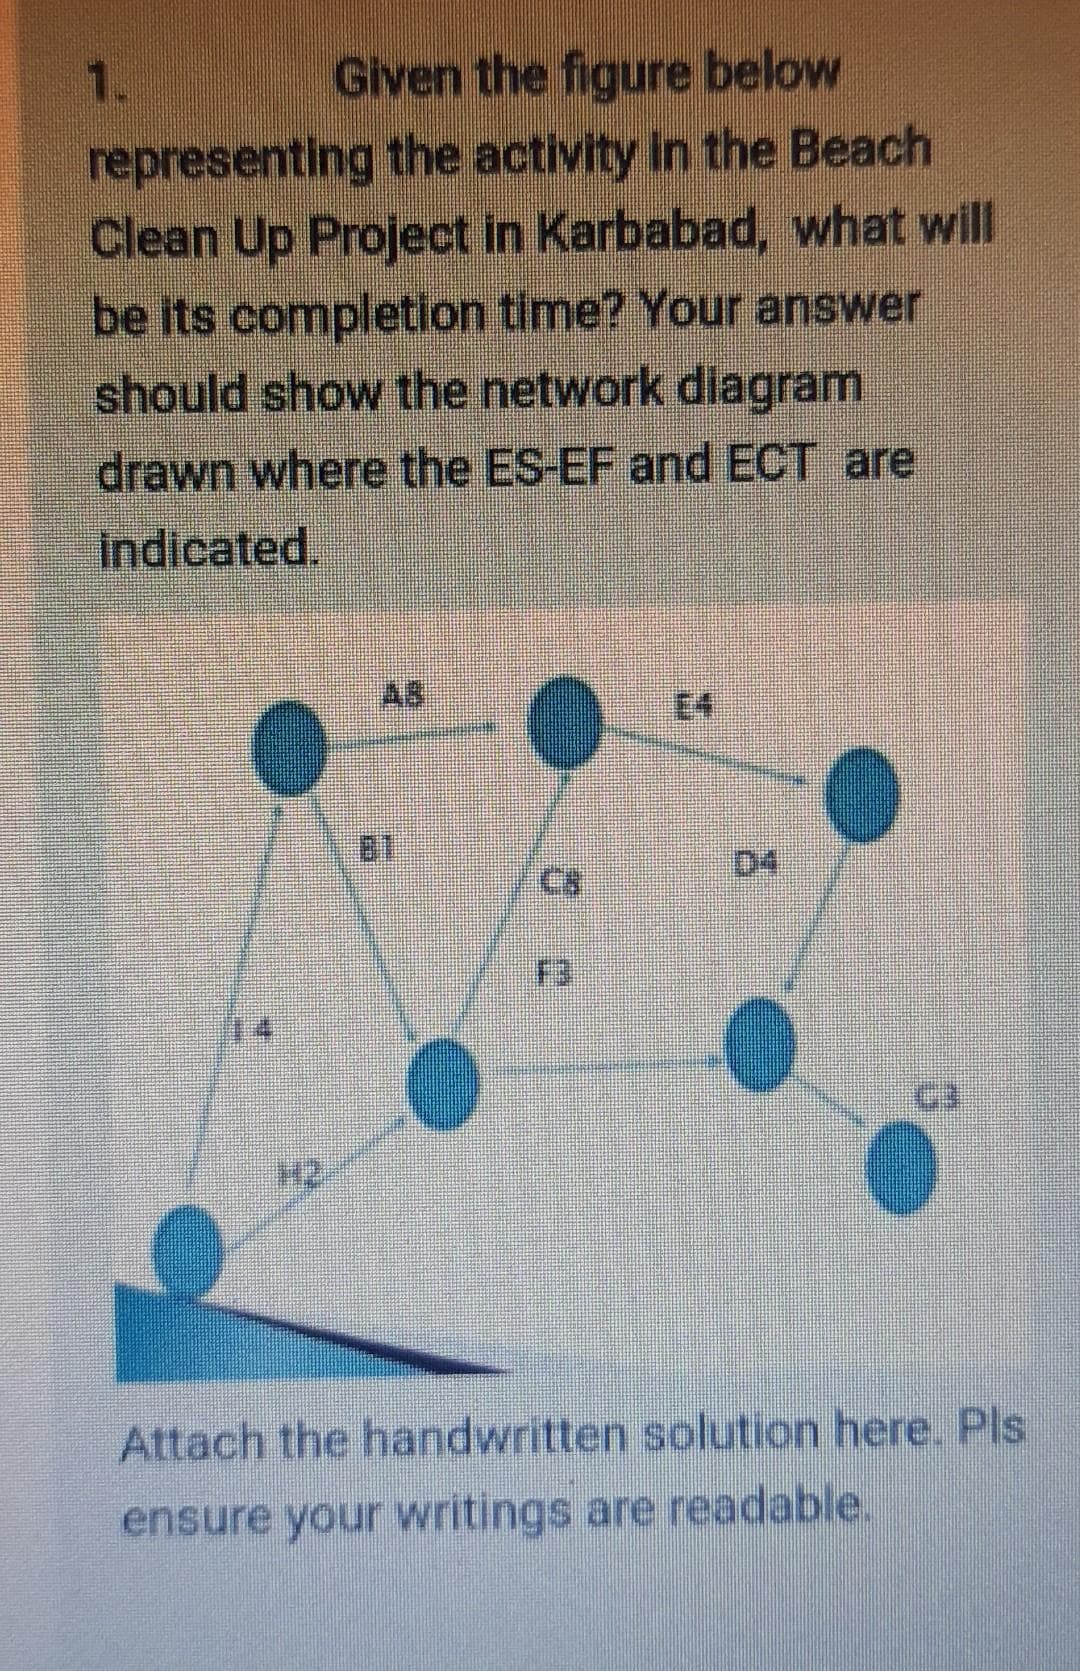 1.
Given the figure below
representing the activity in the Beach
Clean Up Project in Karbabad, what will
be its completion time? Your answer
should show the network dilagram
drawn where the ES-EF and ECT are
Indicated.
AB
E4
C8
D4
F3
Attach the handwritten solution here. Pls
ensure your writings are readable.
